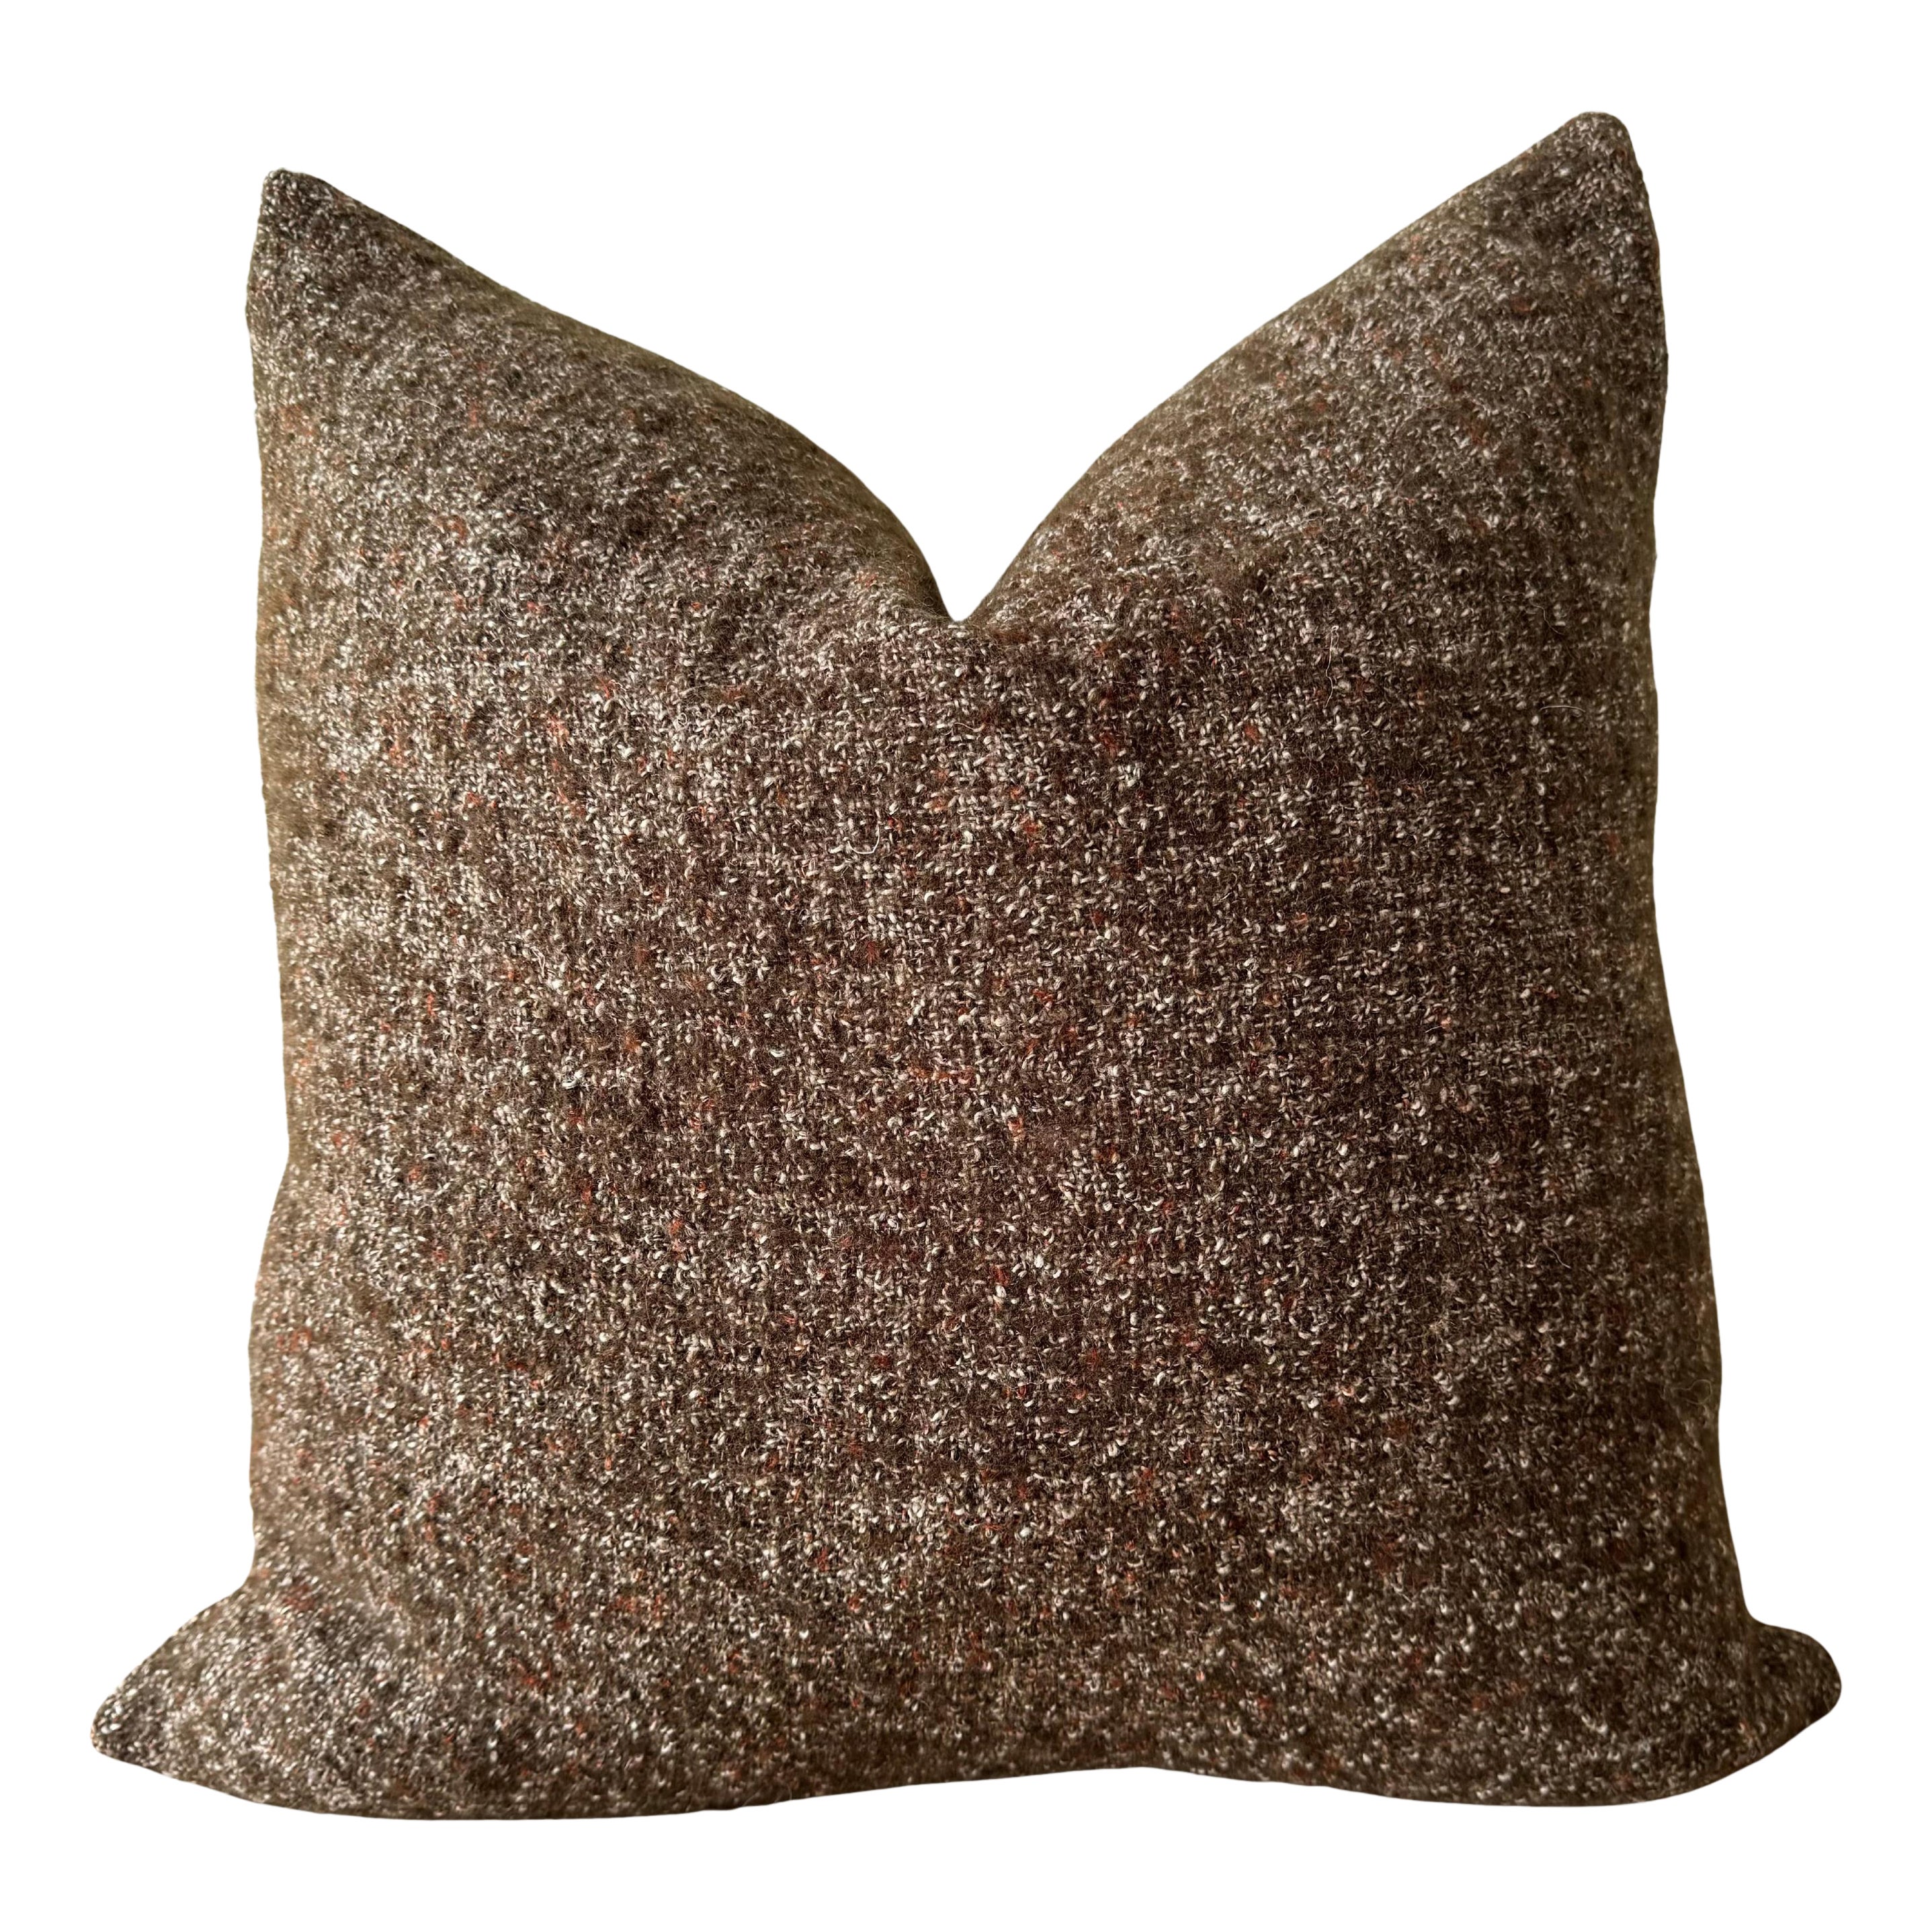 Custom Wool and Linen Pillow with Down Feather Insert in Coco Brown and Rust For Sale